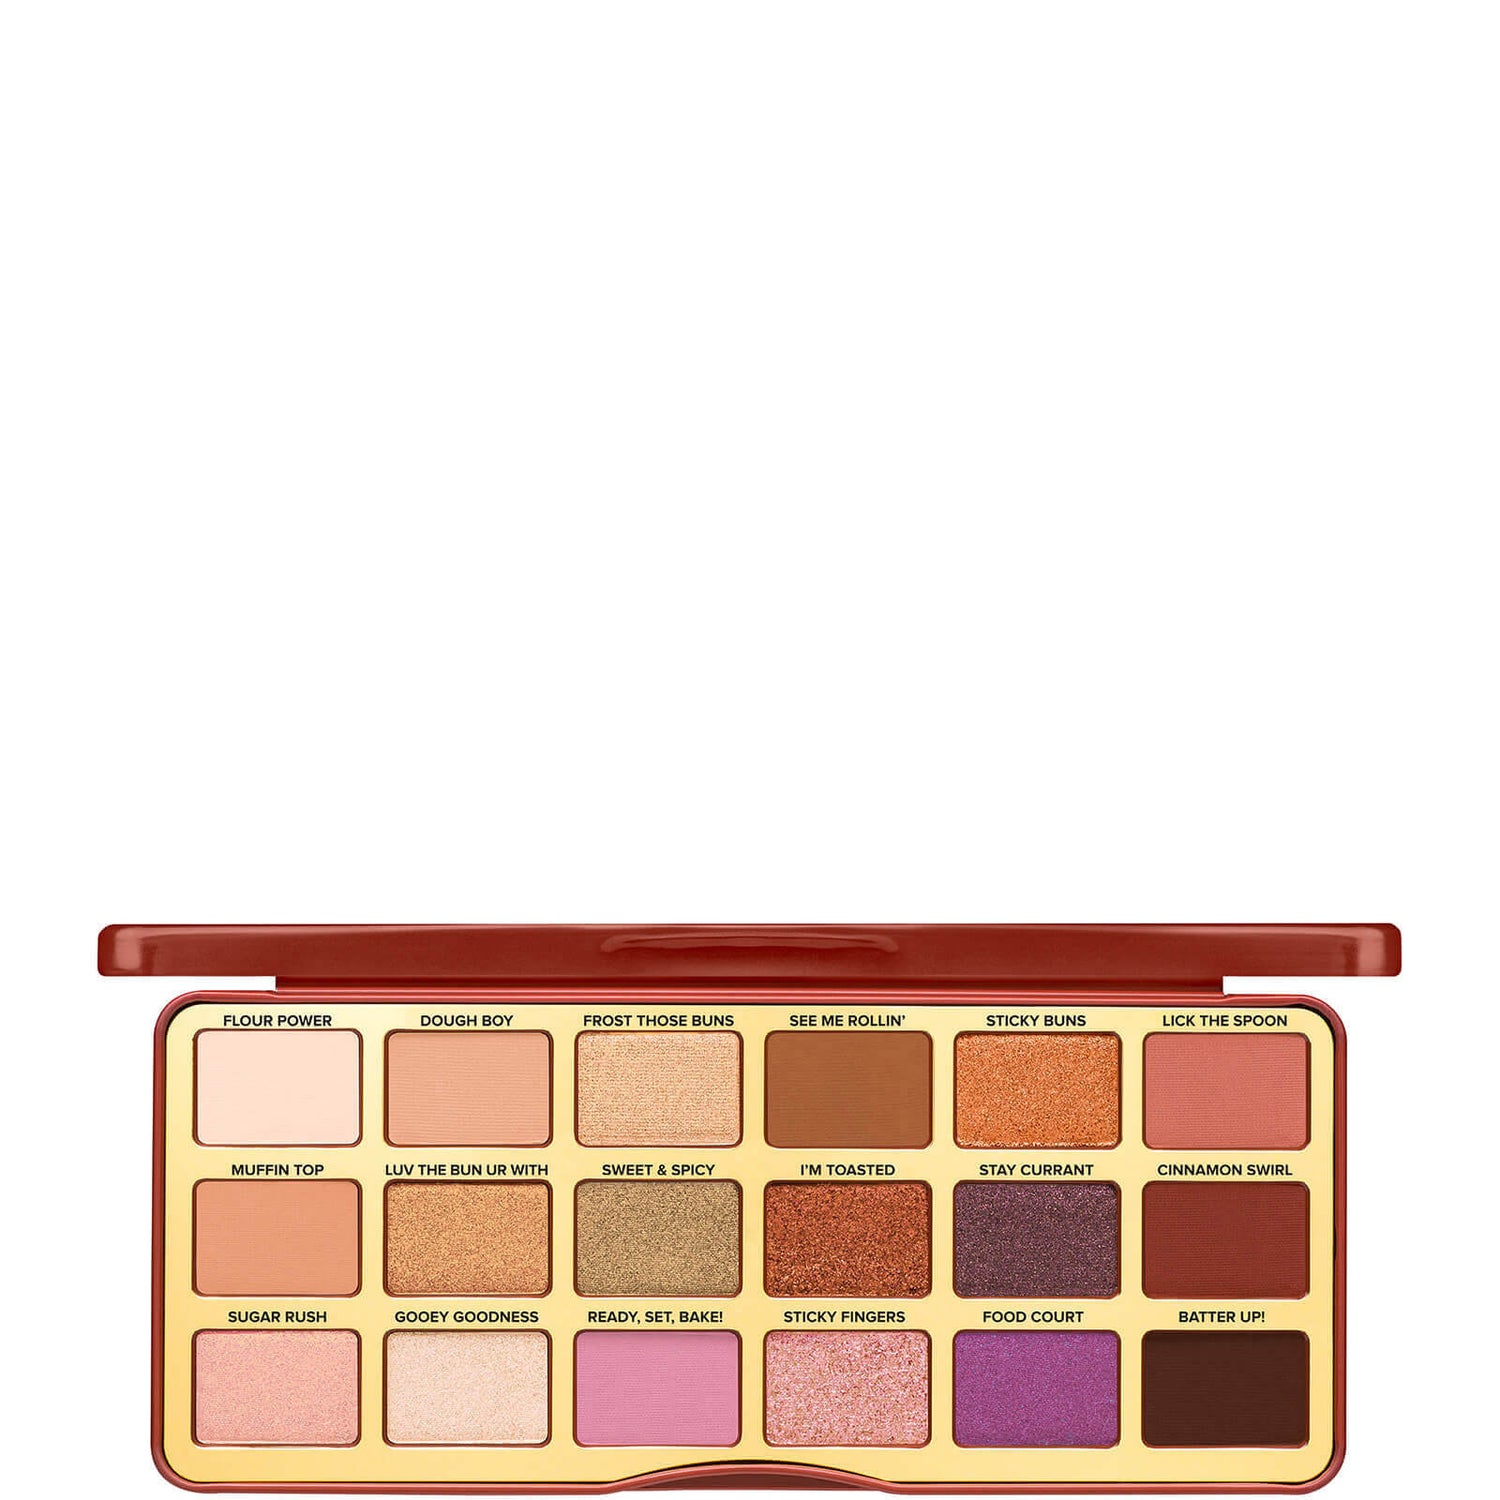 Too Faced Limited Edition Cinnamon Swirl Sweet & Spicy Eyeshadow Palette